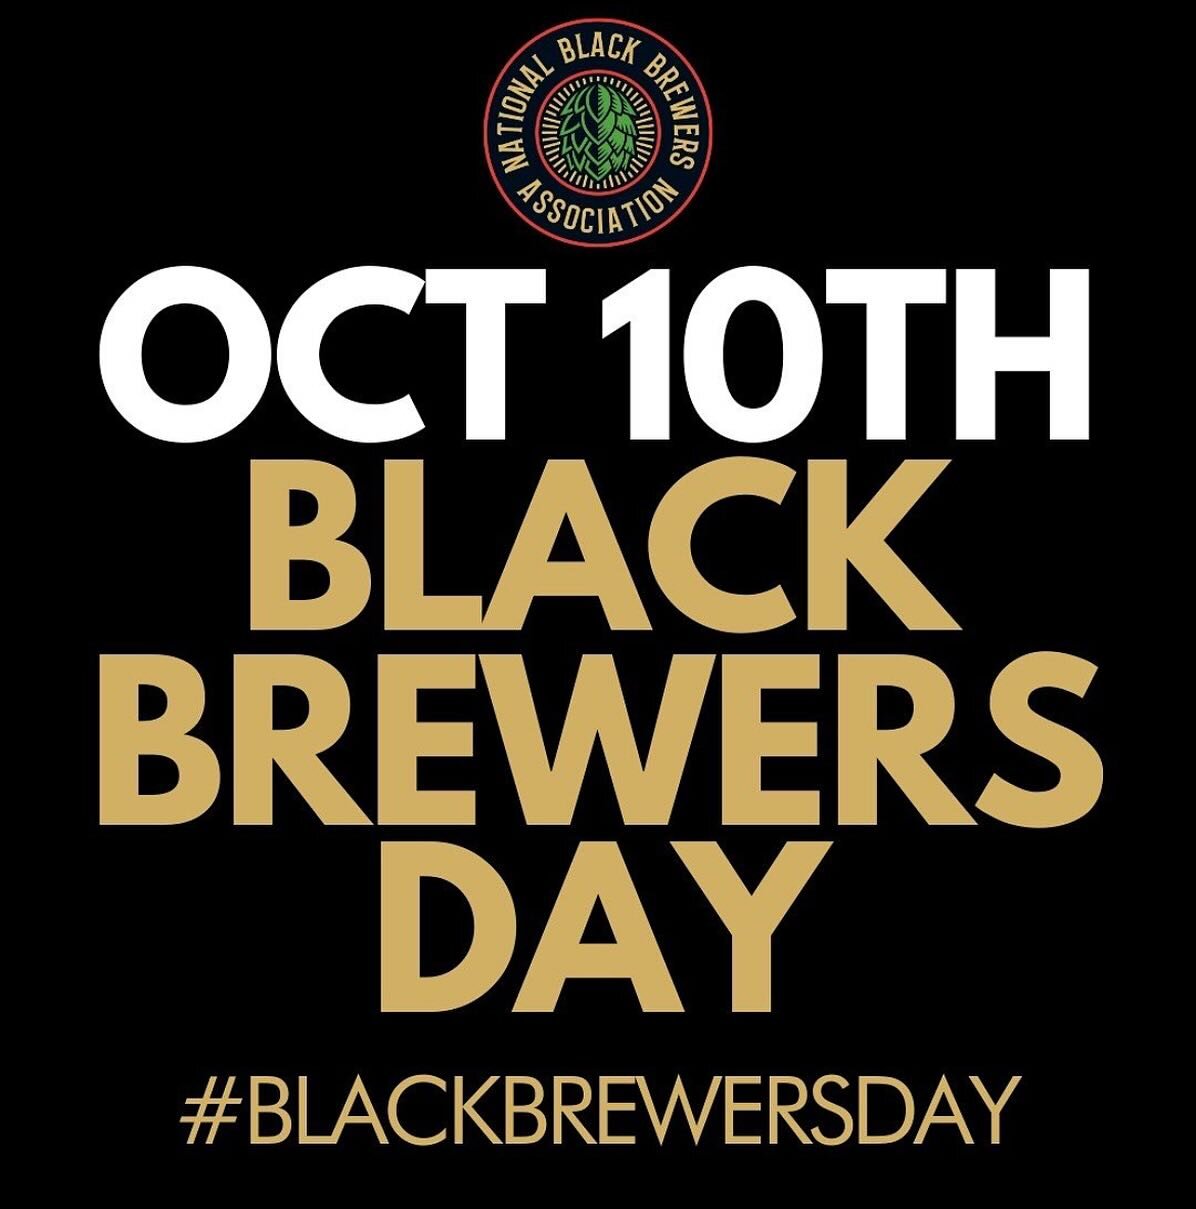 Today, October 10th, is a remarkable day, and we're eagerly anticipating its official recognition in the city of Richmond&hellip; ✊🏾

Over 50 years ago, in October, the country witnessed the birth of the first Black brewery, Peoples Brewing Co., led